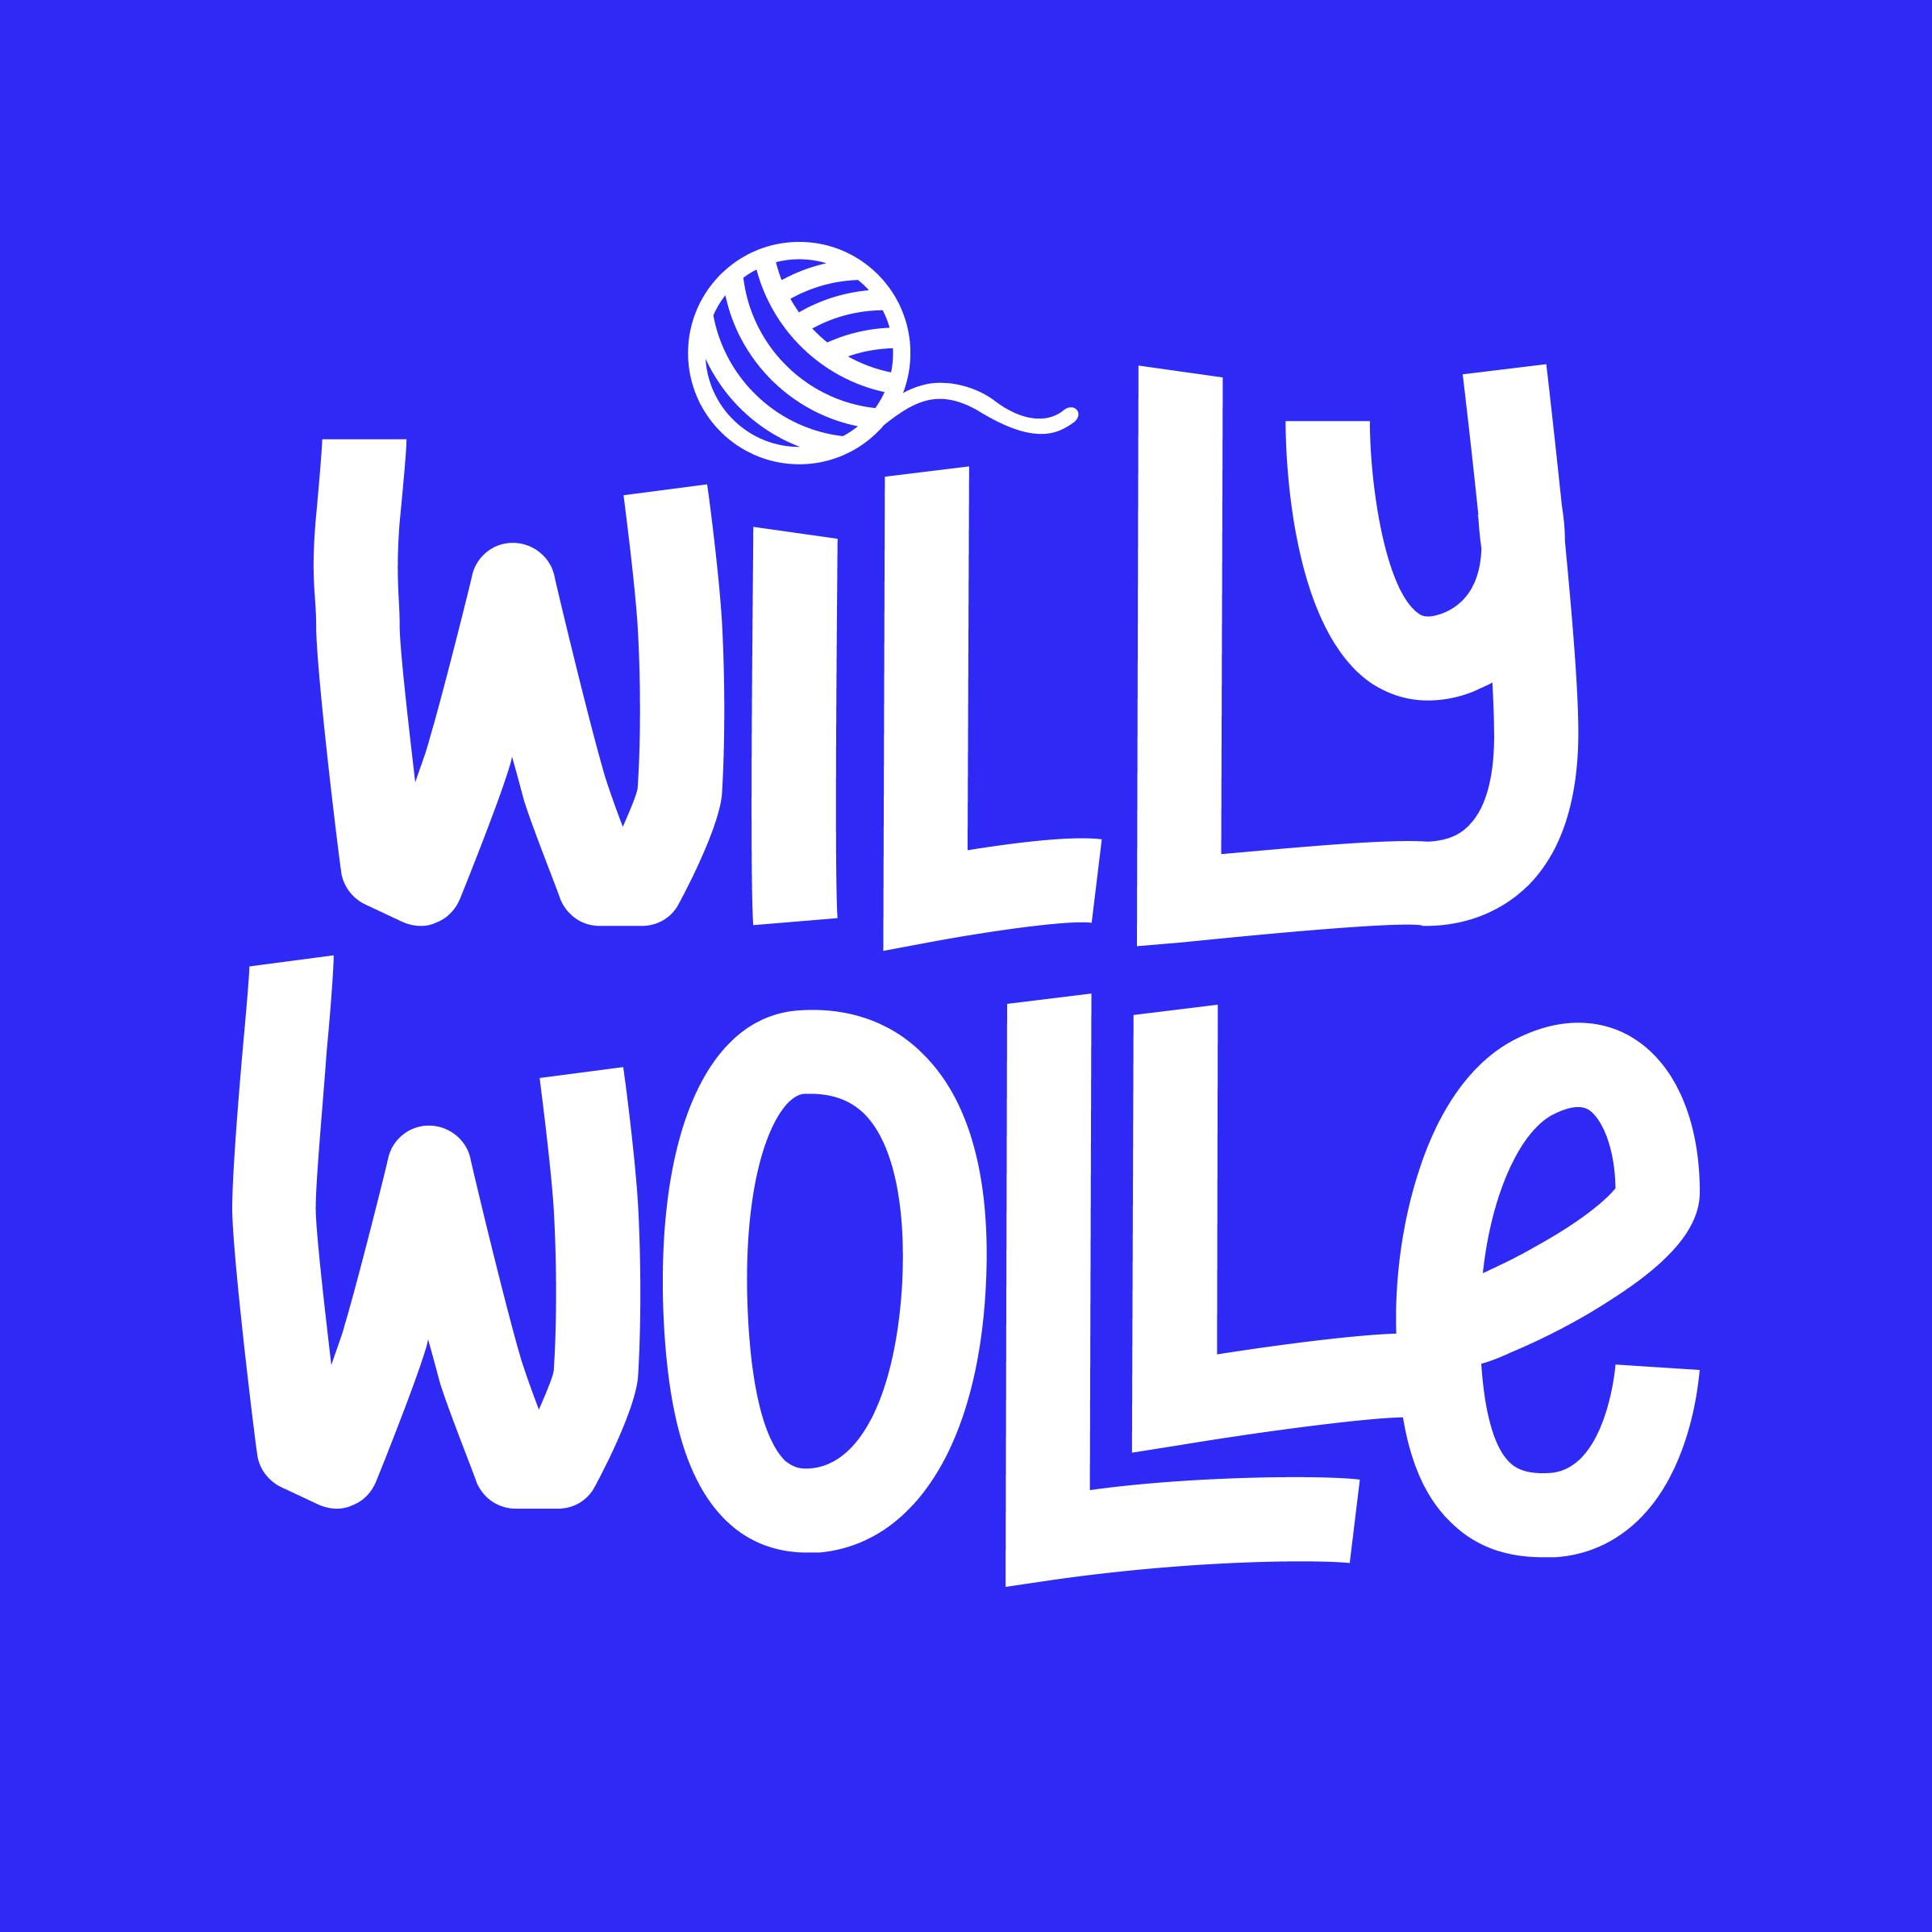 Willy Wolle